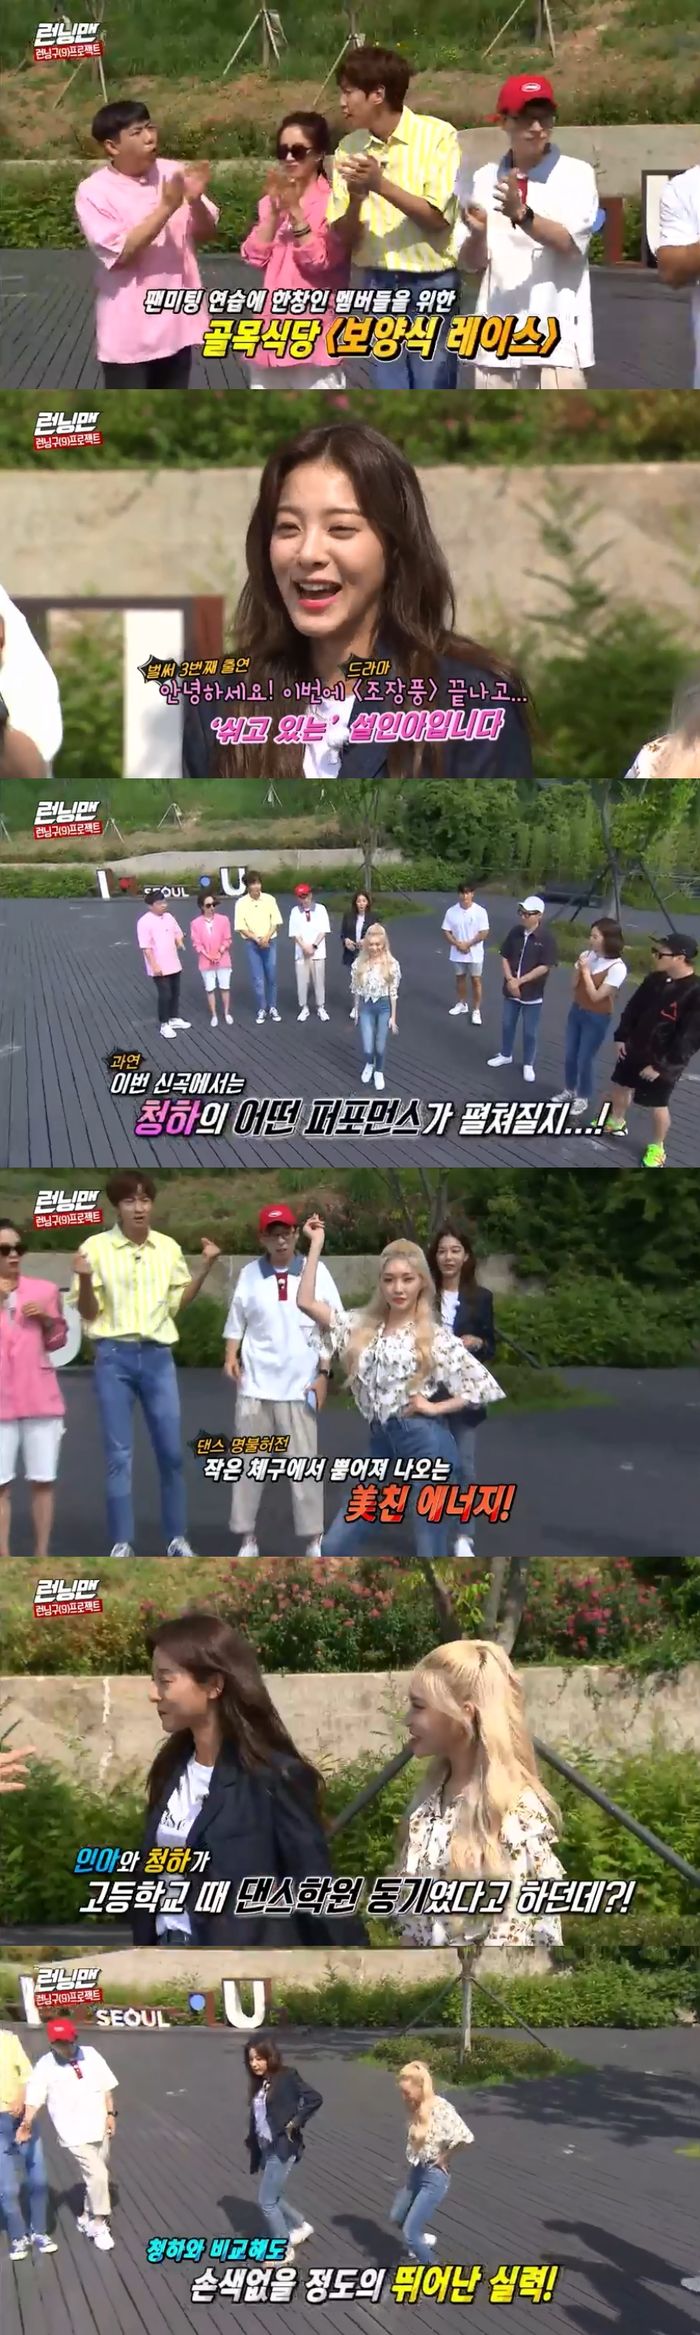 Seol In-ah and Cheong-ha appeared as guests of the Boyang-style race.On SBS Running Man broadcasted on the 23rd, Seol In-ah and Cheong-ha, who appeared as guests, revealed unexpected relationships during high school.Seol In-ah and Cheong-ha appeared as guests who recommended restaurants for the recreational race on the day. Seol In-ah said, I am resting after the drama Cho-jang-pung.Cheongha said, I will come back with a song called Snapping on the 24th. He showed a new transformation by releasing a new song. Haha and Yang Se-chan, who watched it, admired On the other hand, Seol In-ah and Cheong-ha said that they were from the same dance academy during high school and said, I am meeting after my debut.When the Running Man were surprised by the two people of the same age, Sul In-ah asked, Why are you surprised? Then the members joked,  (Snow) In-ah is mature.The two of them then breathed together in accordance with Cheonghas 12 oclock already. Yoo Jae-seok said, I saw Cheongha trying hard to show a little more.Since then, the Running Man have moved to start the Zero-Zero Race with the summer ceremony with Seol In-ah and Cheong-ha.